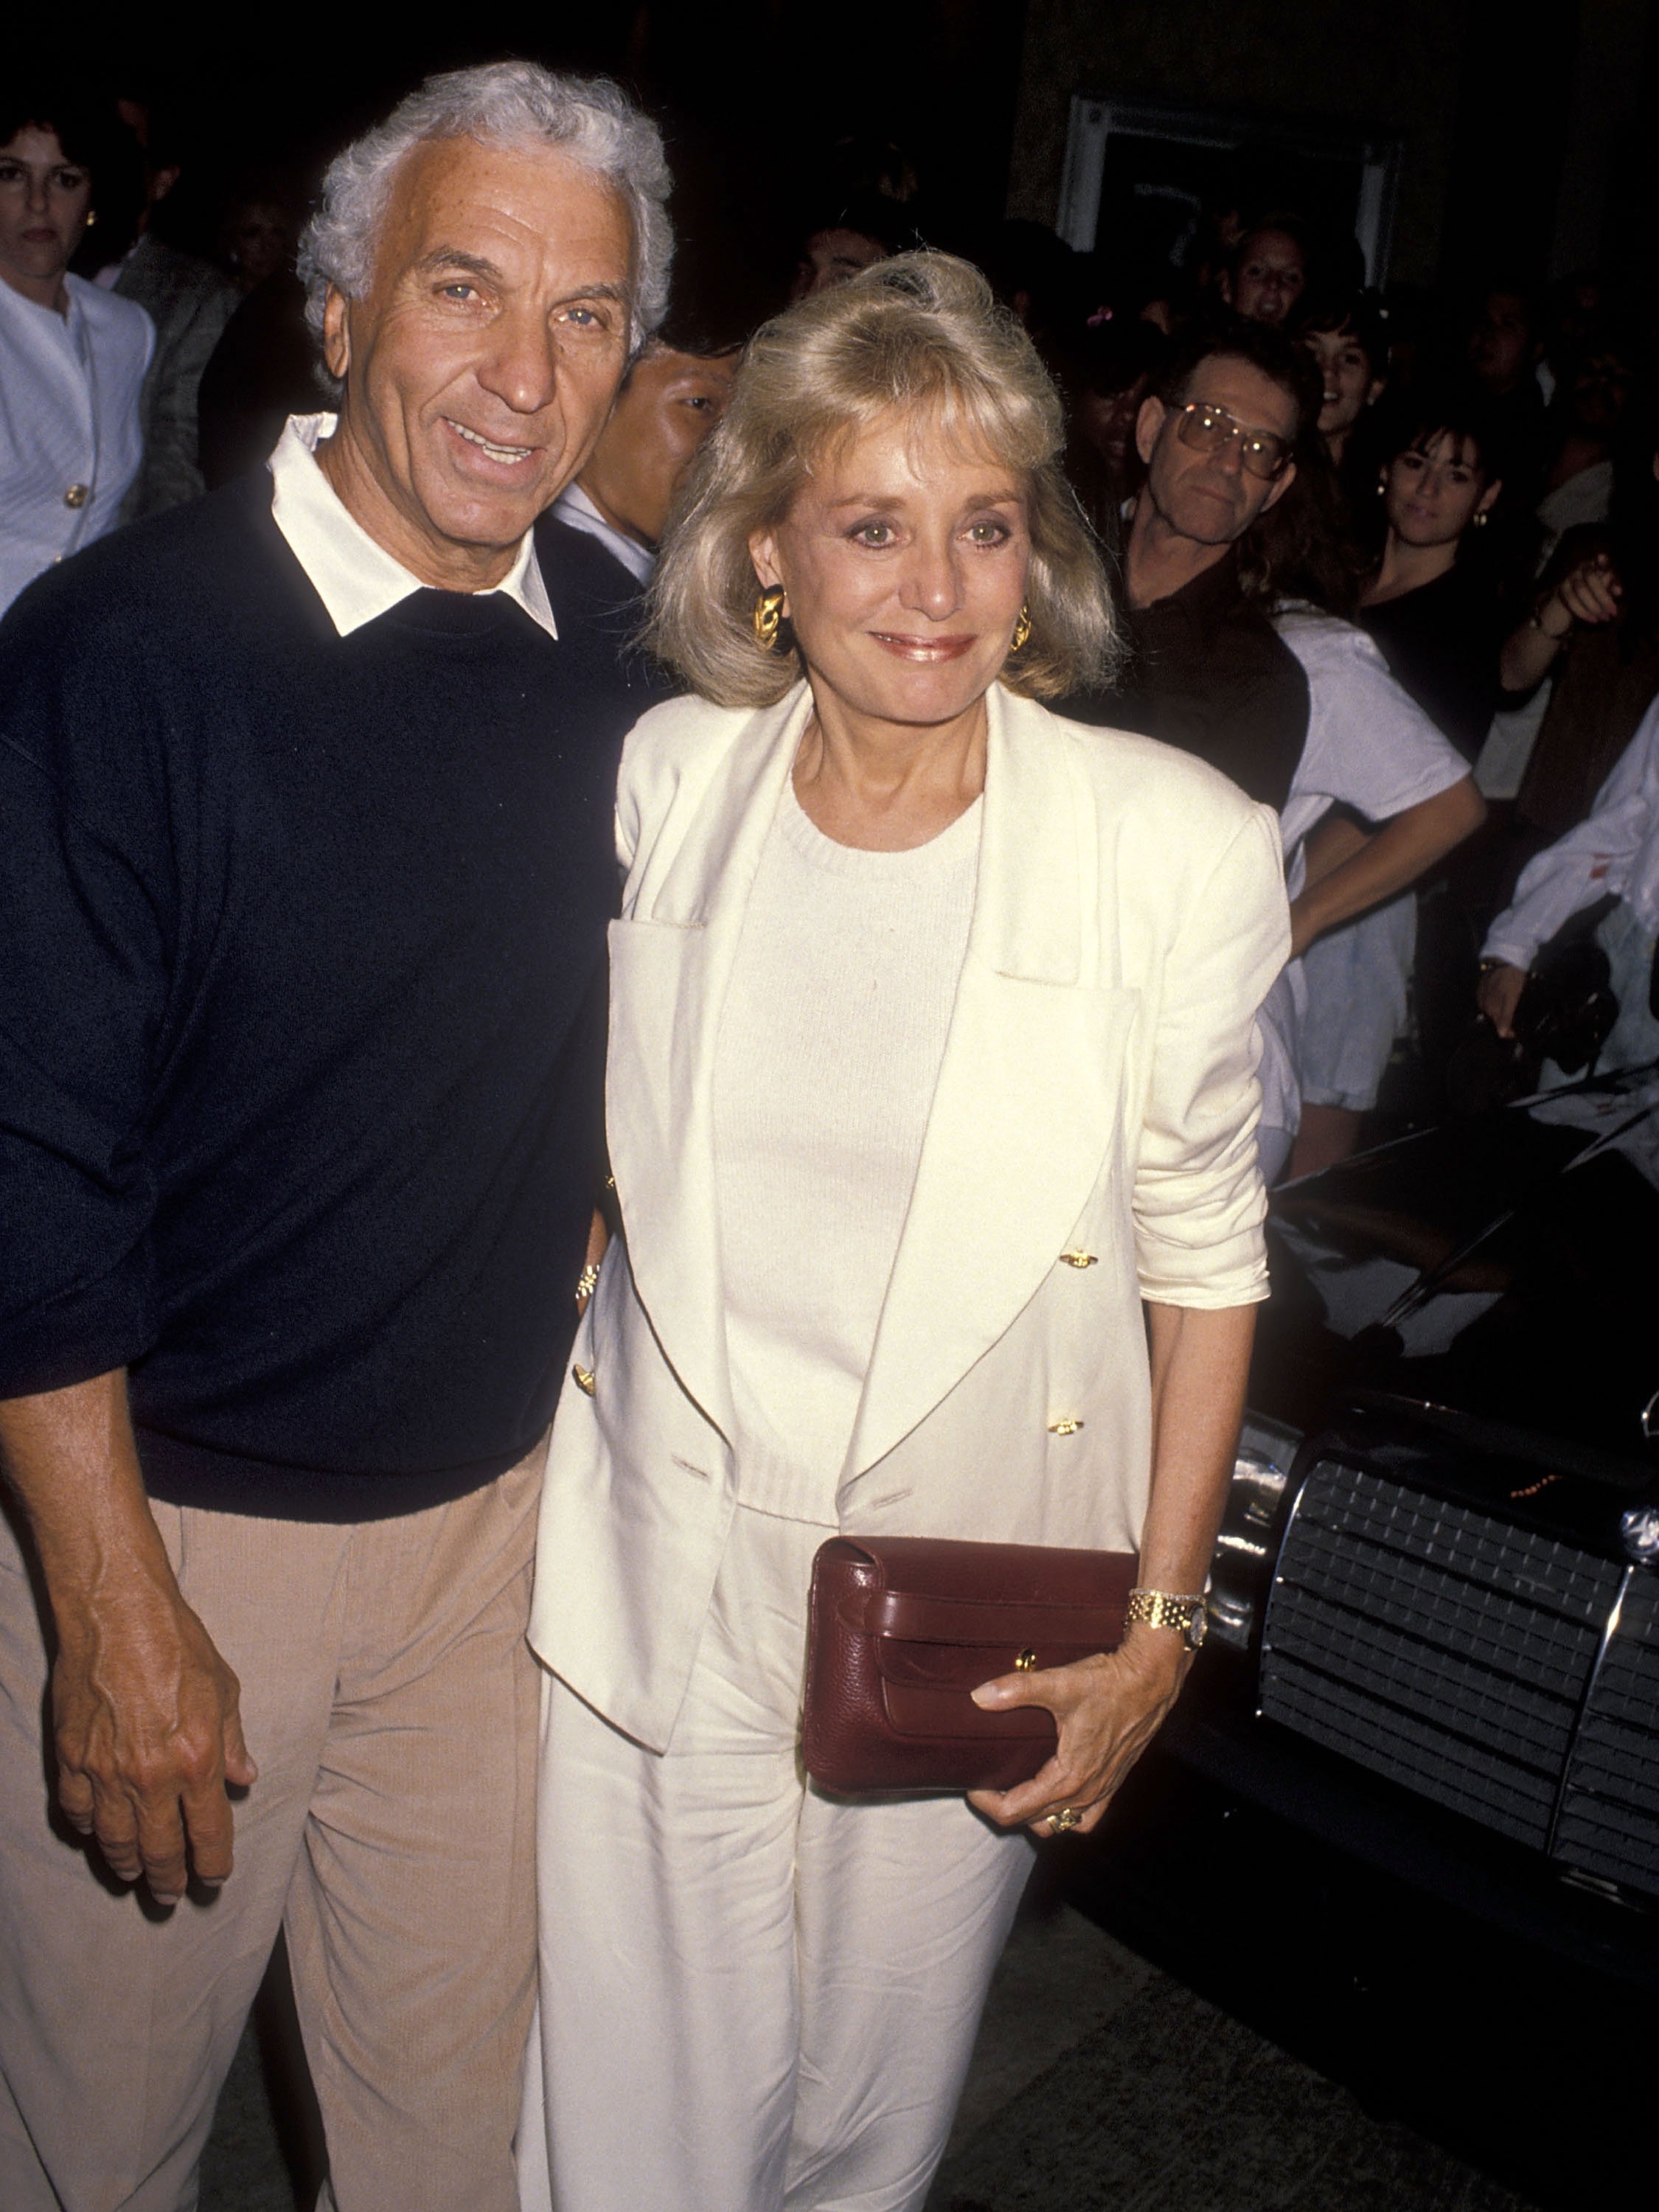 Merv Adelson and TV journalist Barbara Walters at the "Presumed Innocent" Westwood Premiere on July 25, 1990 at the Mann Bruin Theatre in Westwood, California. | Source: Getty Images